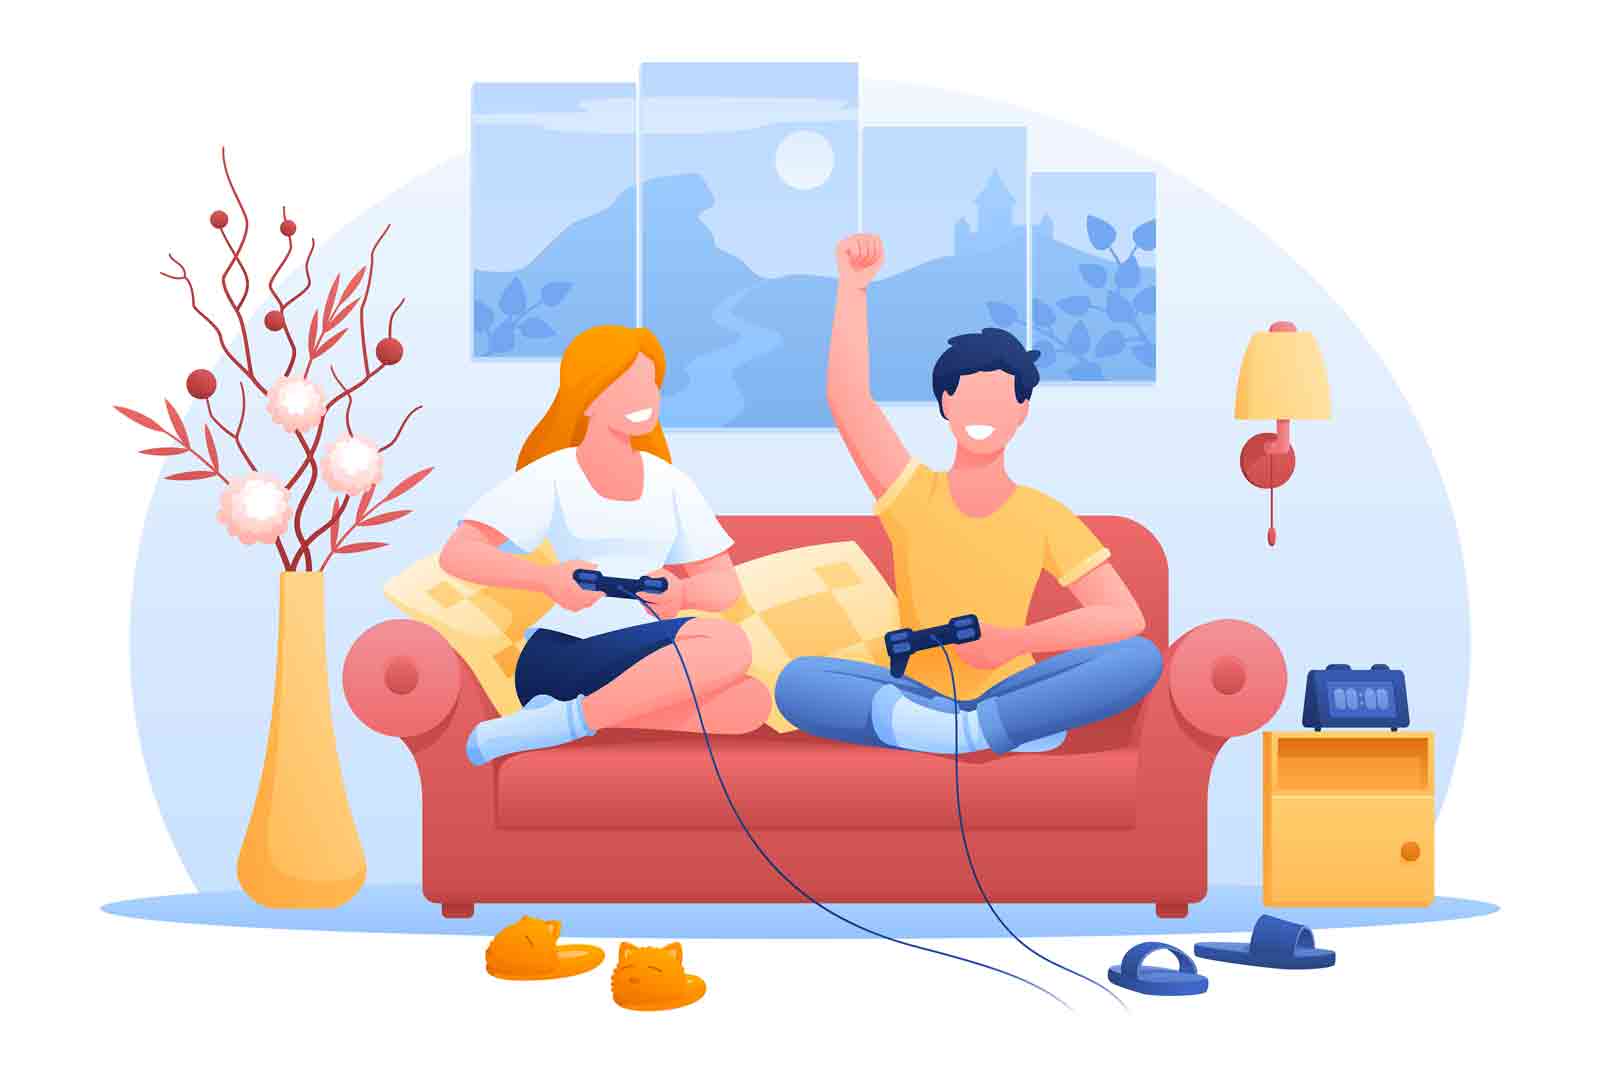 Couple playing computer games at home together vector illustration. Man and woman using game joystick flat style. Home entertainment idea